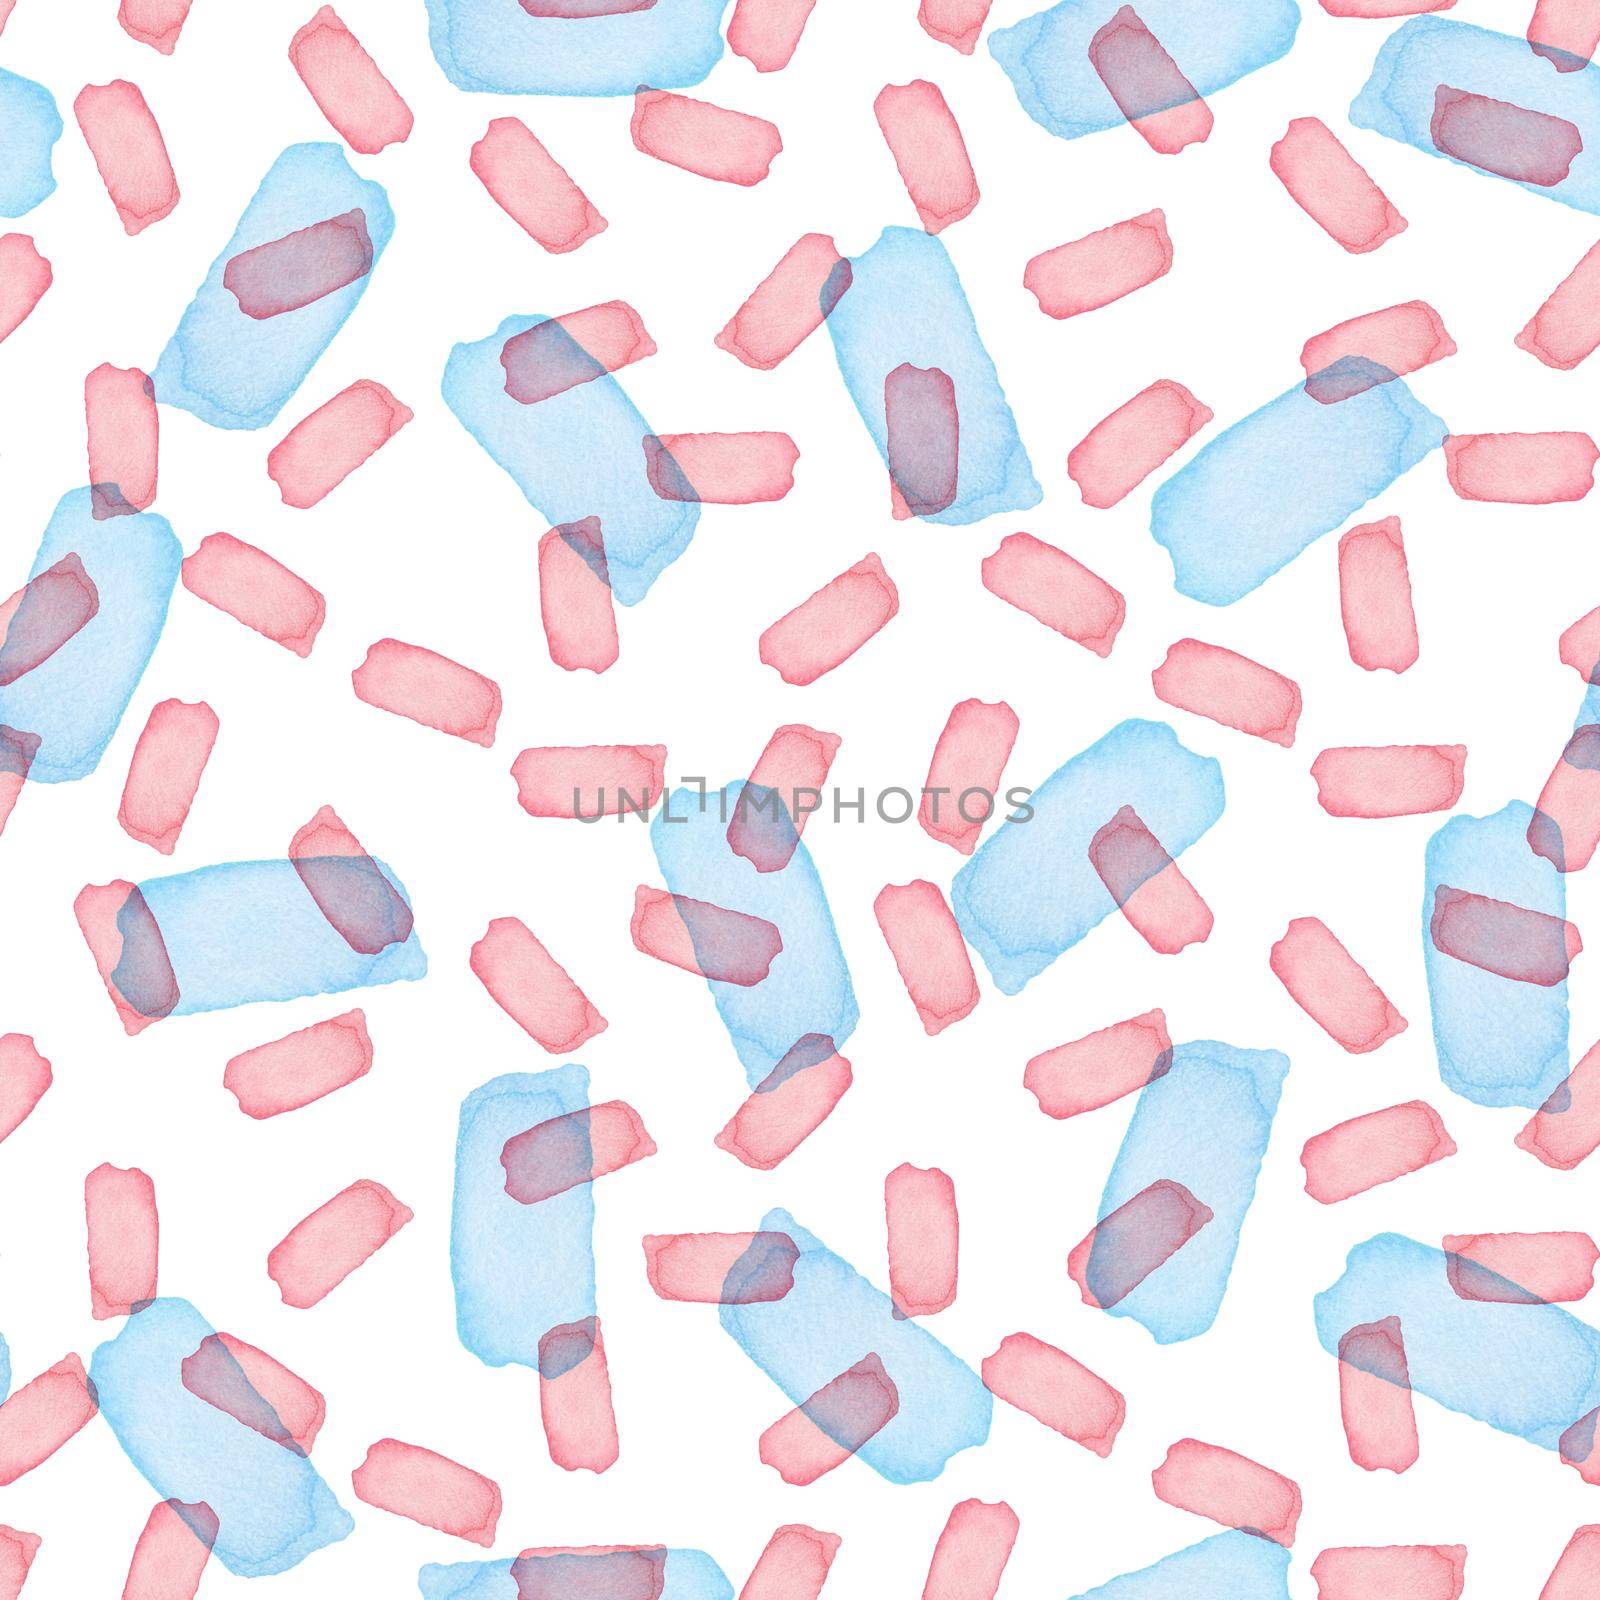 Paintbrush Stroke Blot Seamless Watercolor Pattern. Abstract watercolour shapes in Pink and Blue Color. Light Design for Teen Kid and School Clothes.